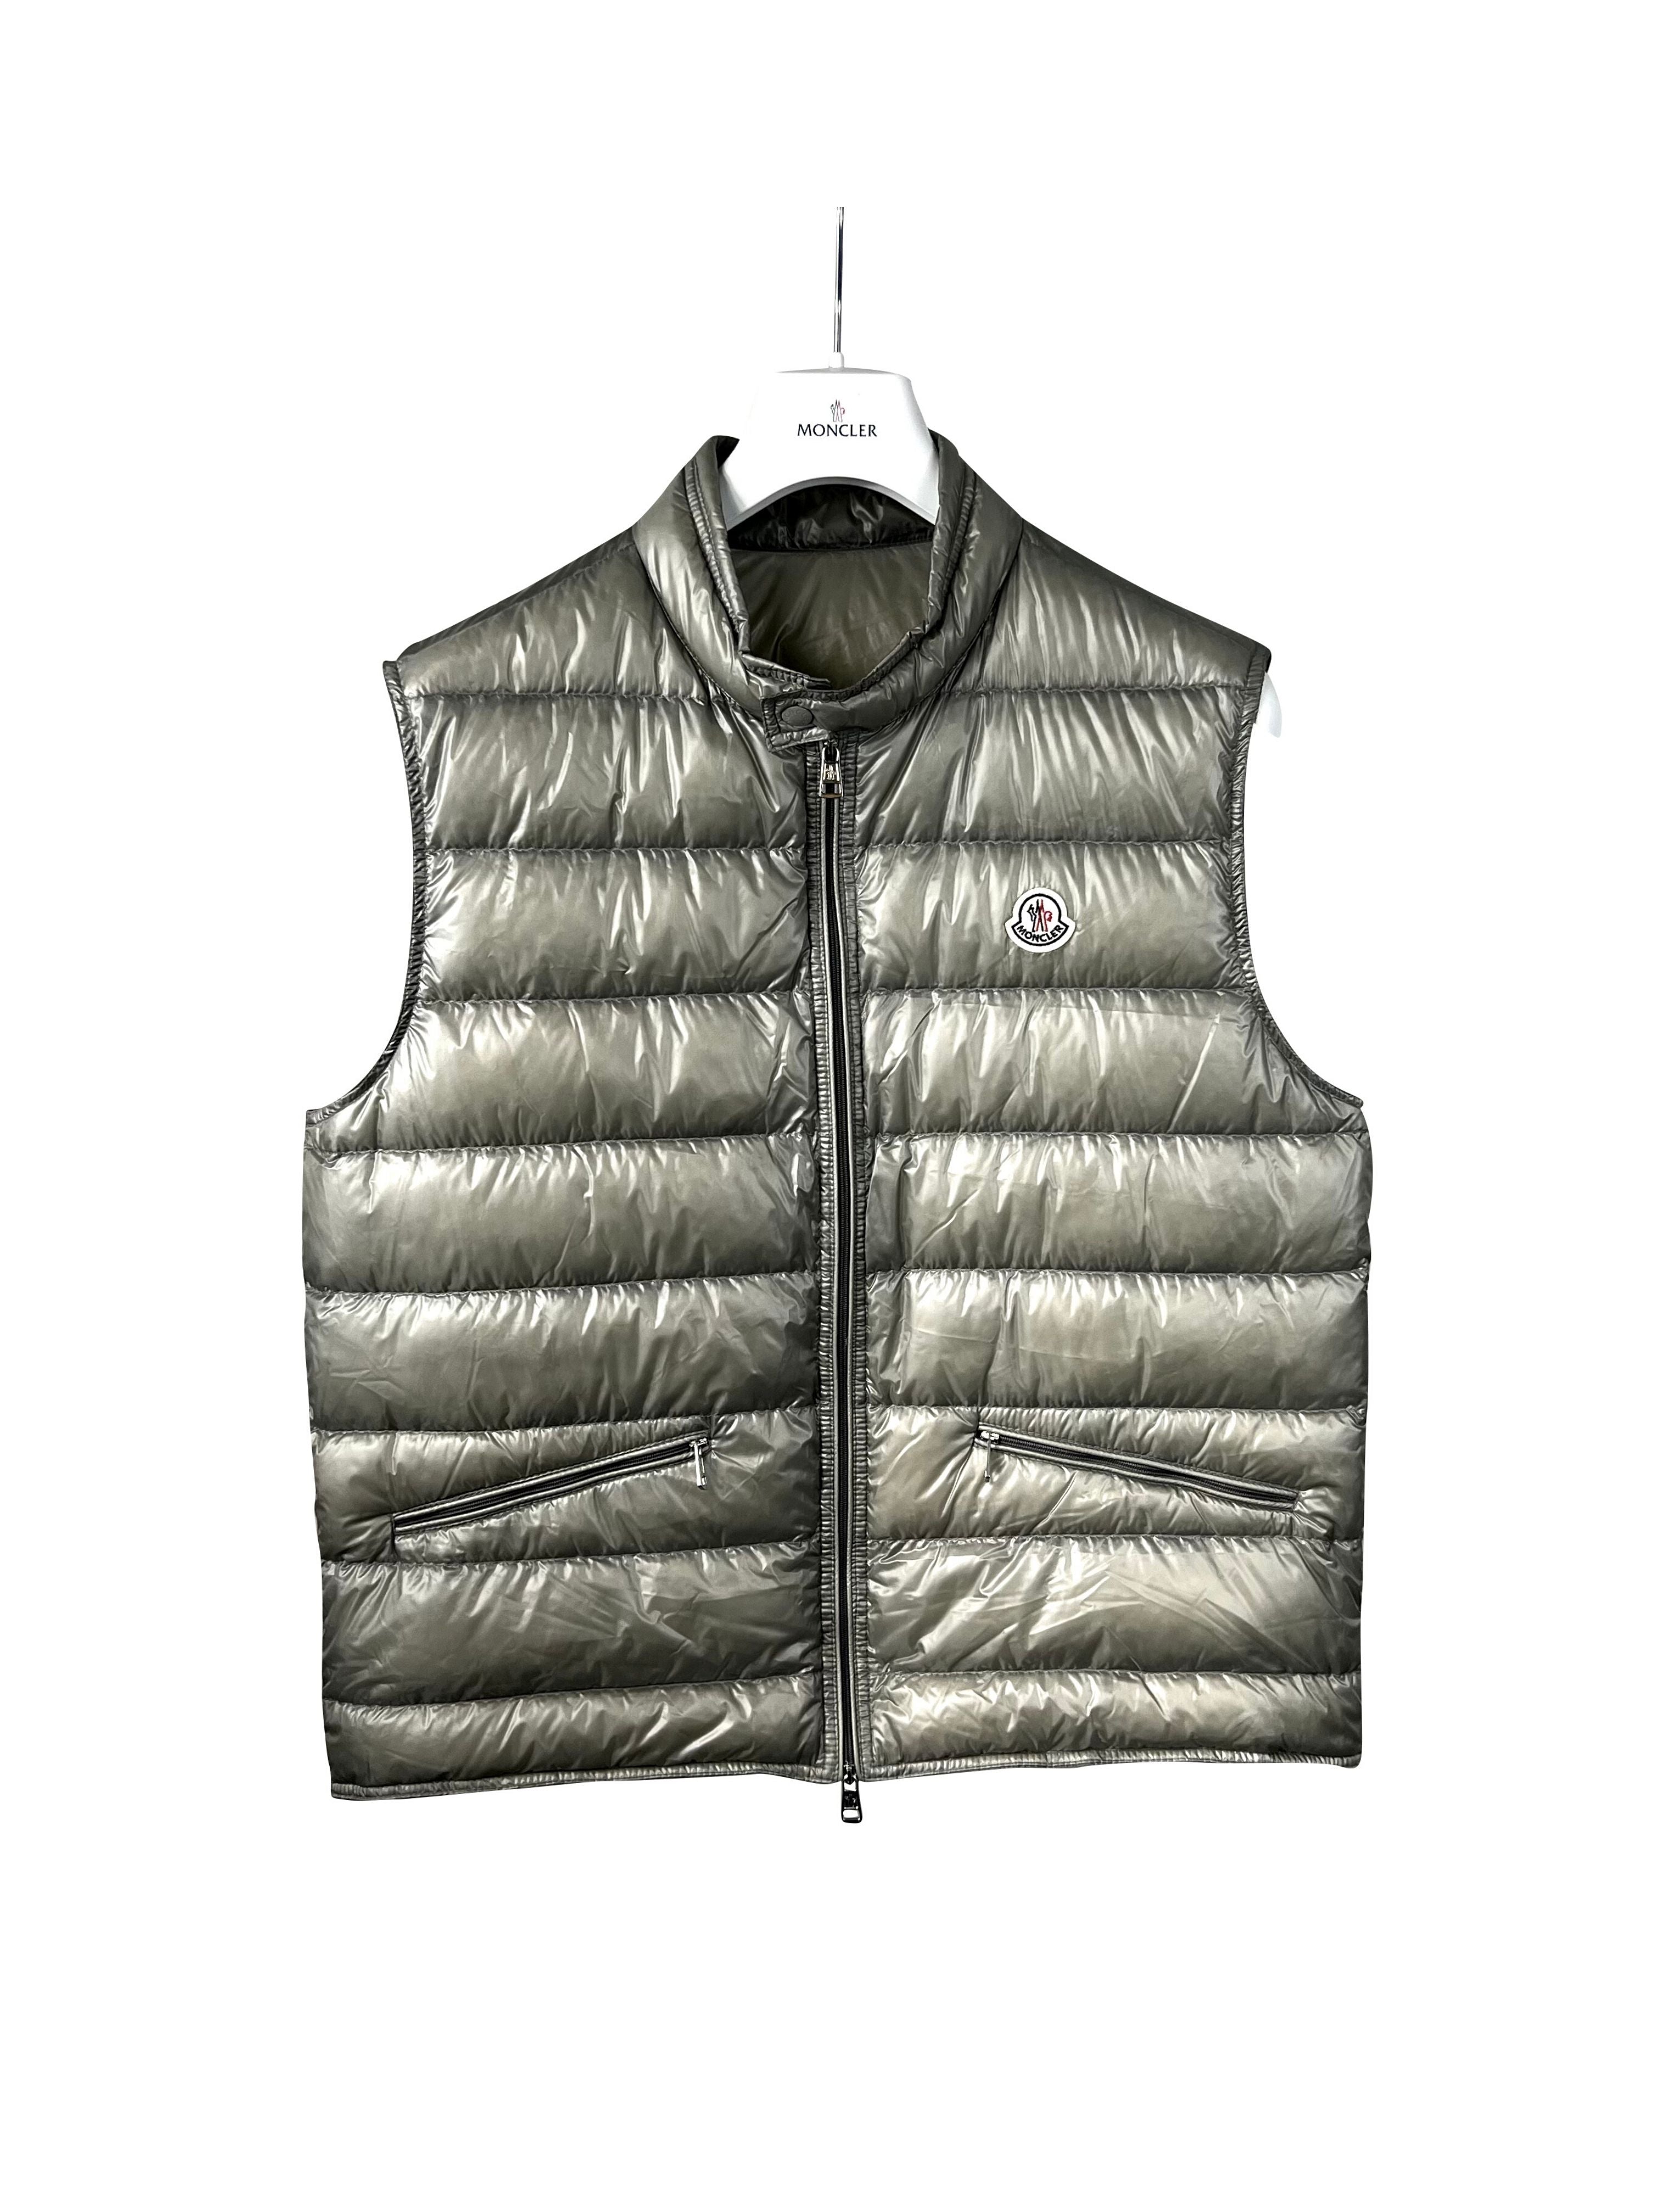 Moncler Gui - Size 5 - HB Authenticated Luxury Wear